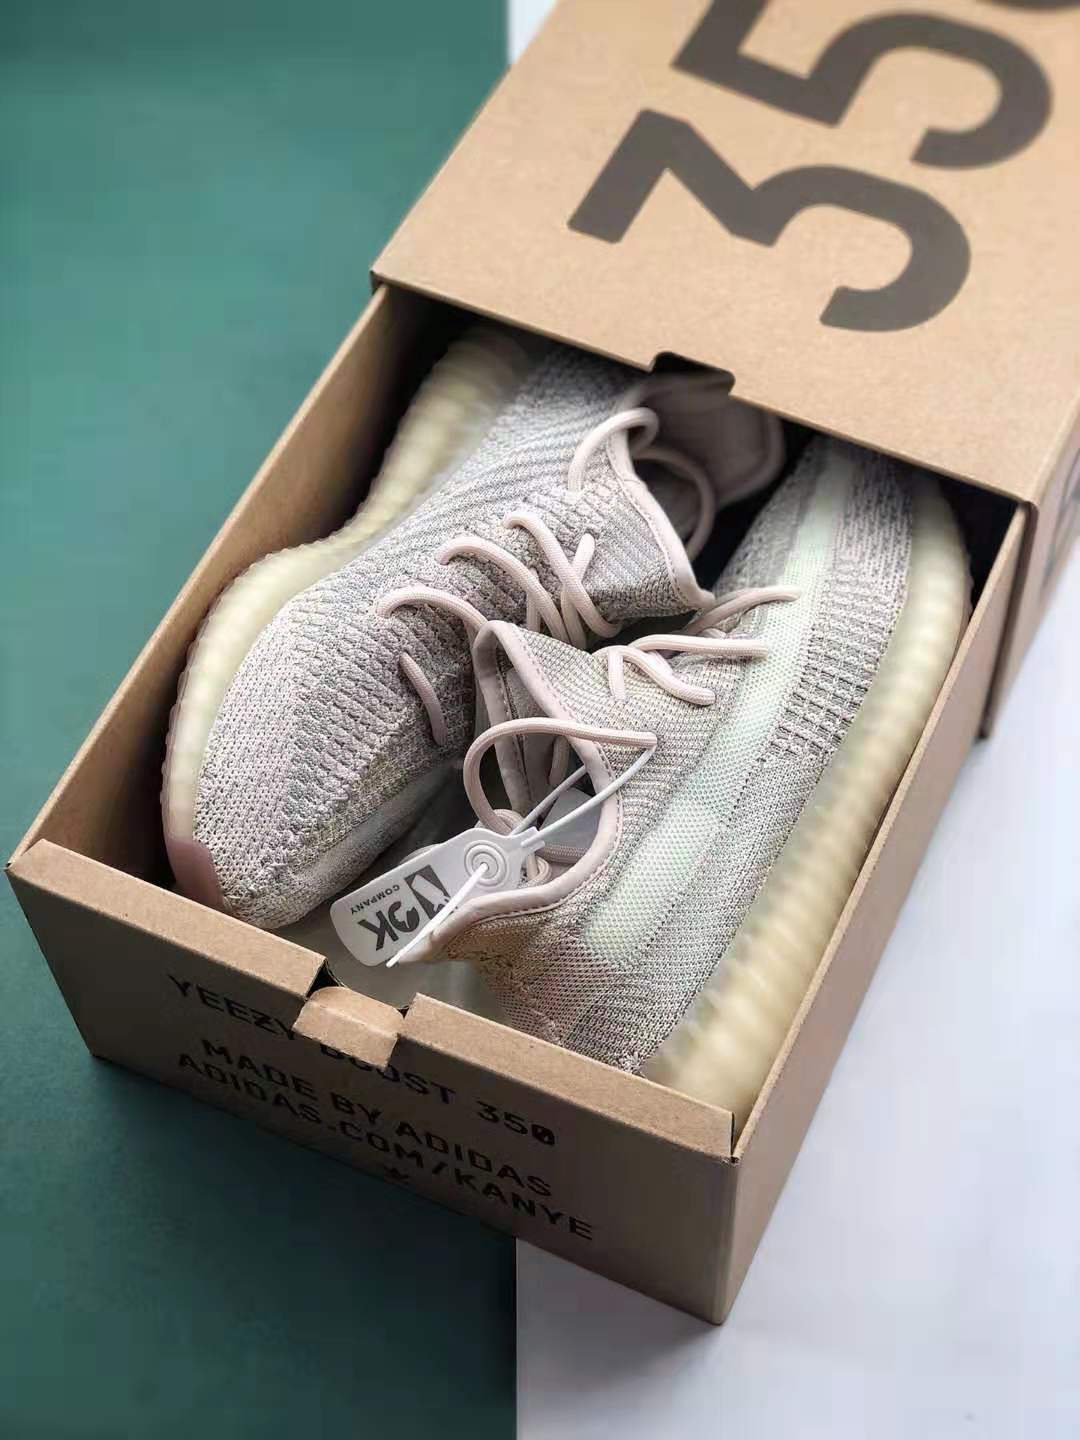 Adidas Yeezy Boost 350 V2 Citrin Non-Reflective FW3042 - Buy Now!